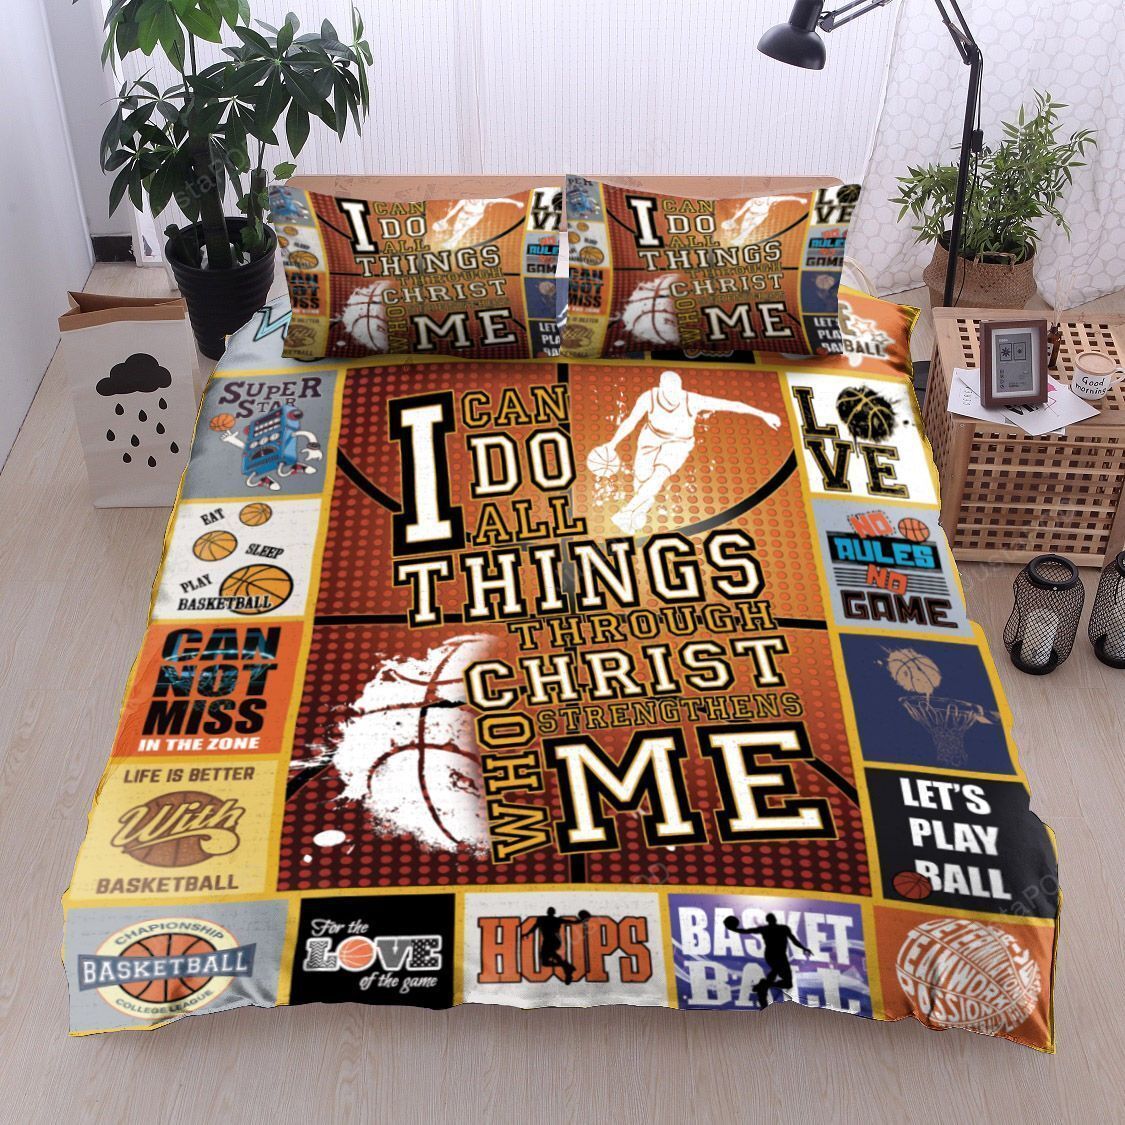 Basketball I can do all things through Chritst Who strengthen me bedding set